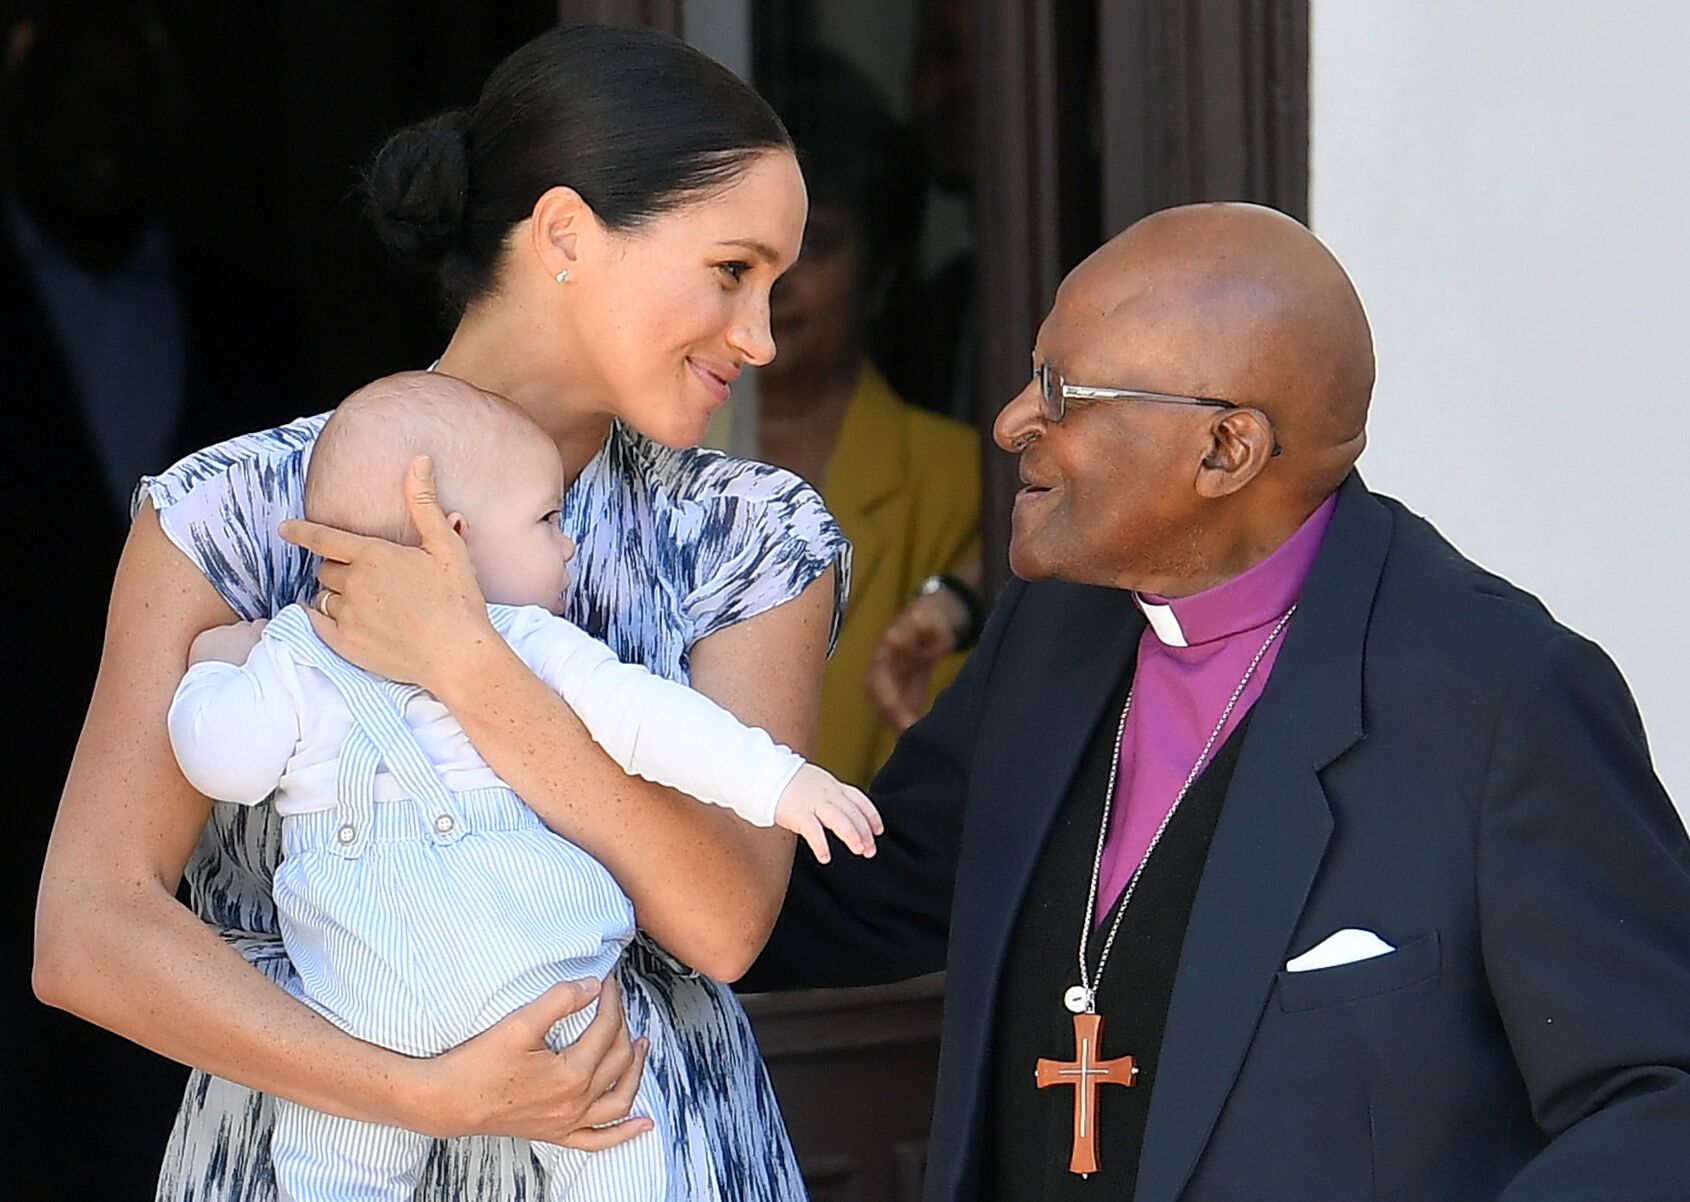 The Royal Sussex baby Archie meets Bishop Desmond Tutu/ Source: Getty Images